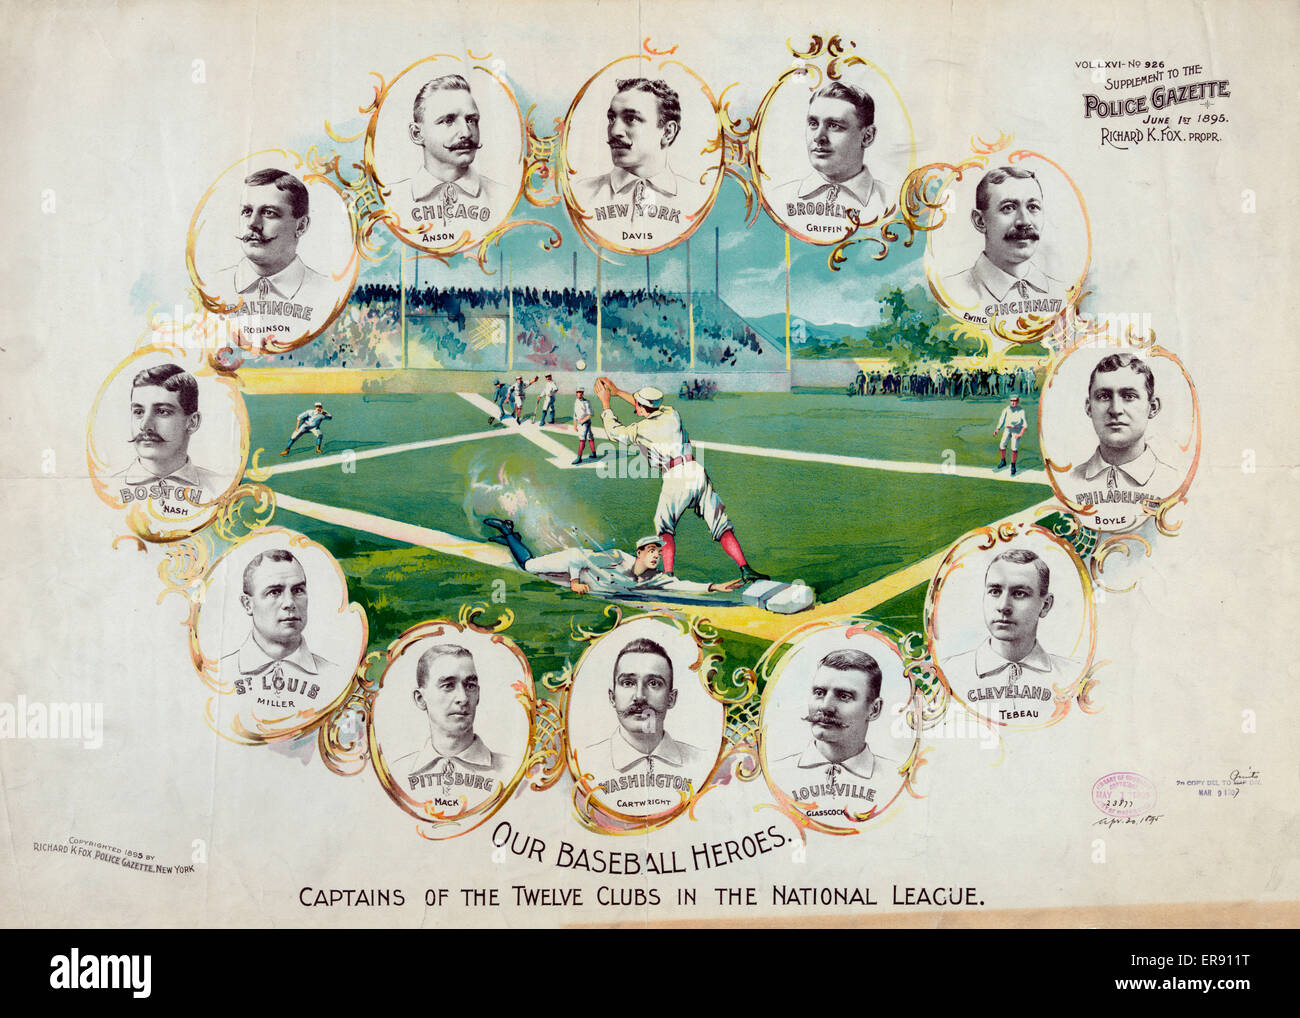 Our baseball heroes - captains of the twelve clubs in the Na Stock Photo